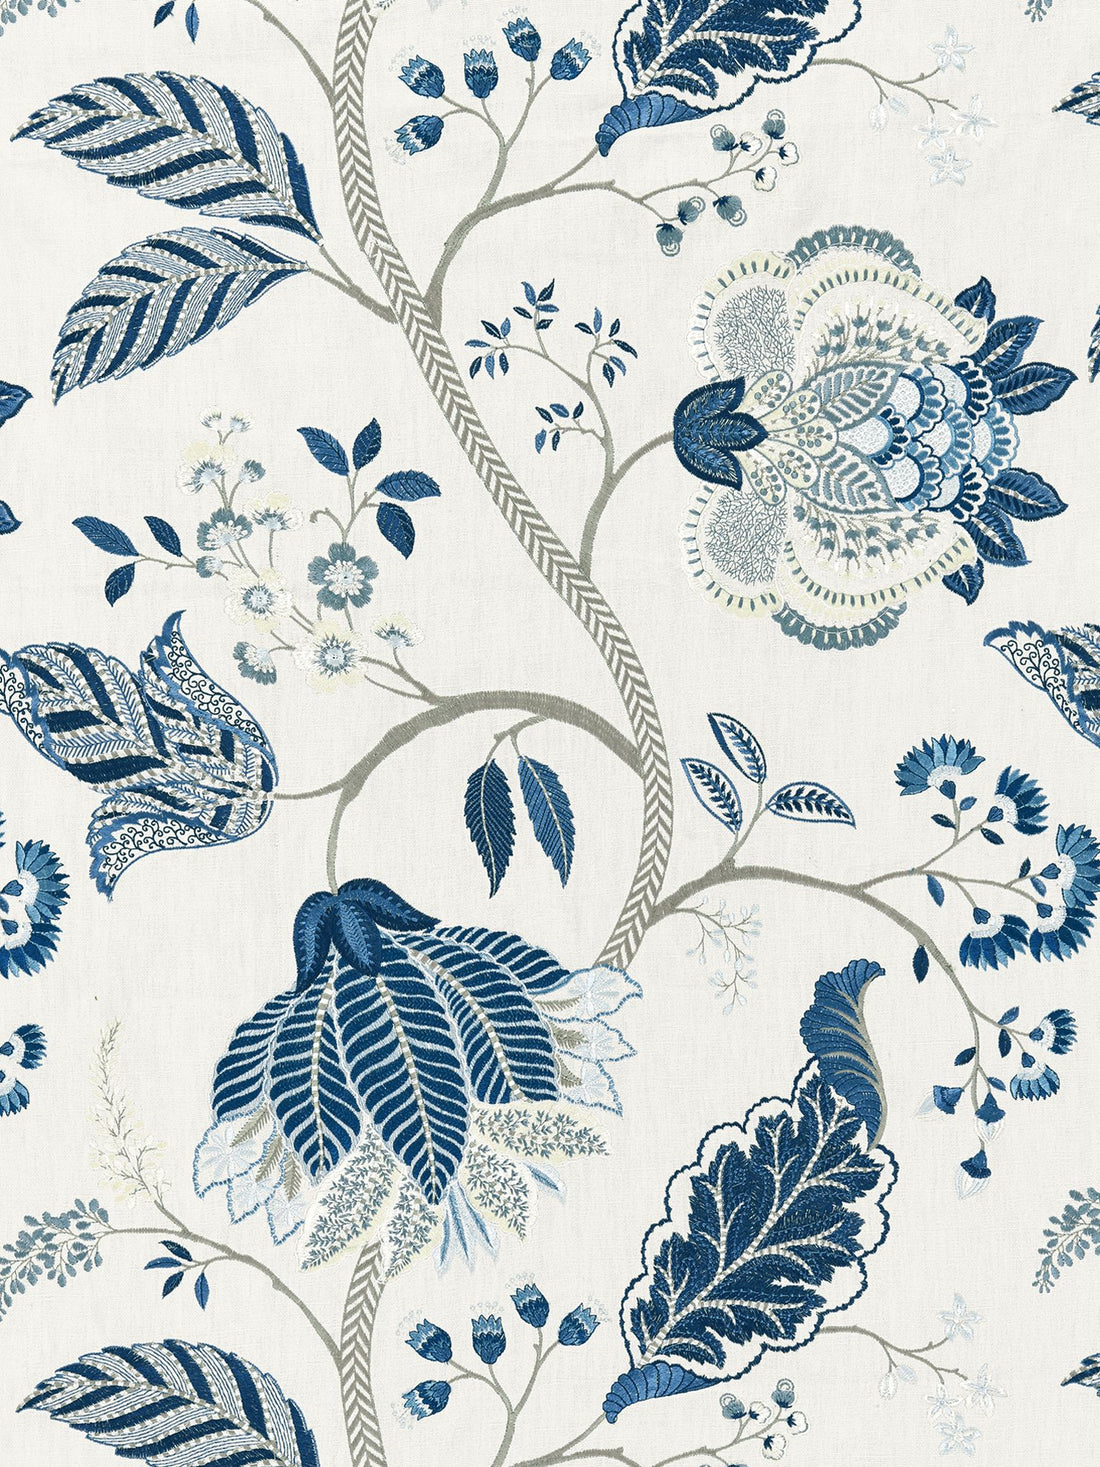 Palampore Embroidery fabric in porcelain color - pattern number SC 000227175 - by Scalamandre in the Scalamandre Fabrics Book 1 collection